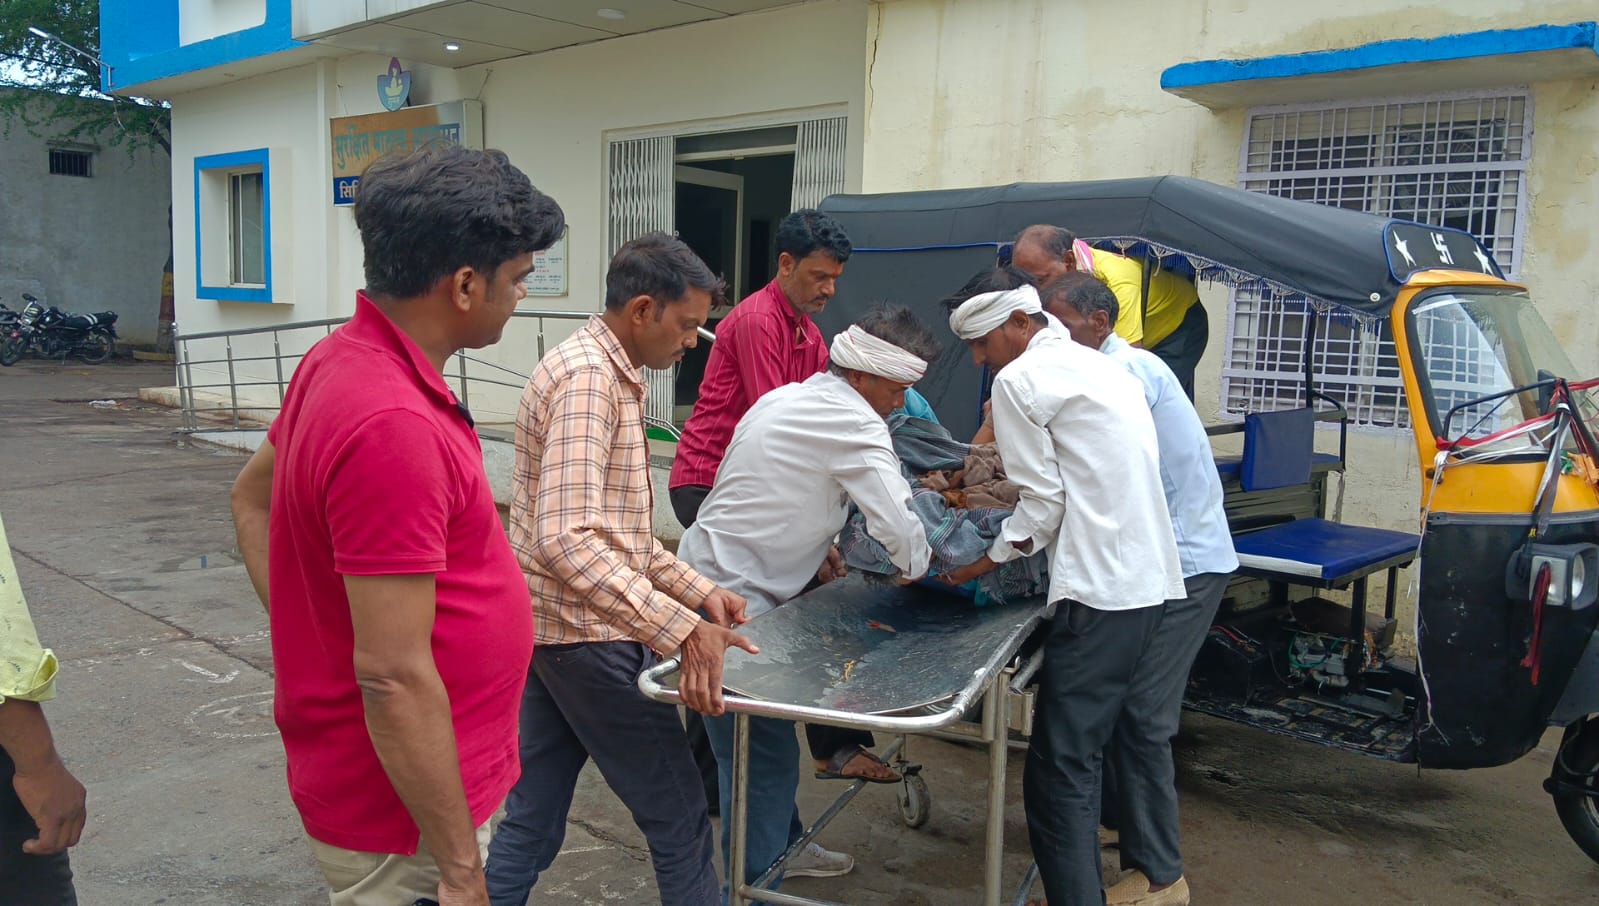 Old man died in the grip of hail, was going to Bhandara with his family by tractor-trolley